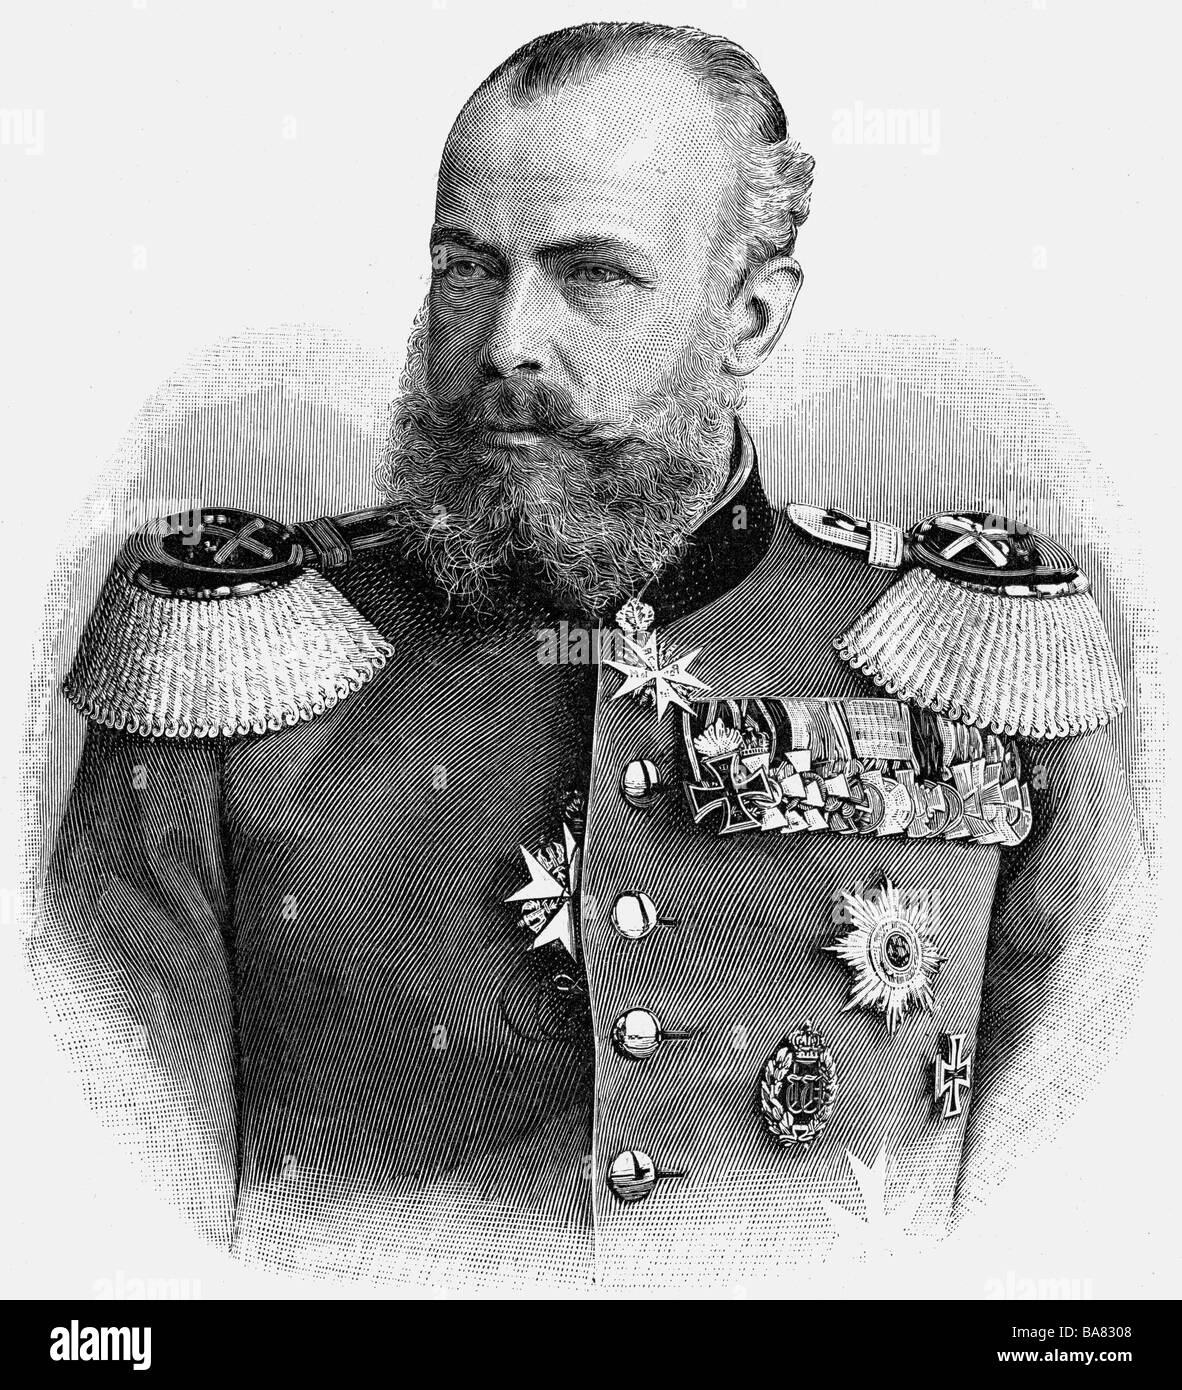 Albert, 8.5.1837 - 13.9.1906, Prince of Prussia, Prussian general, portrait, wood engraving, circa 1890, , Stock Photo